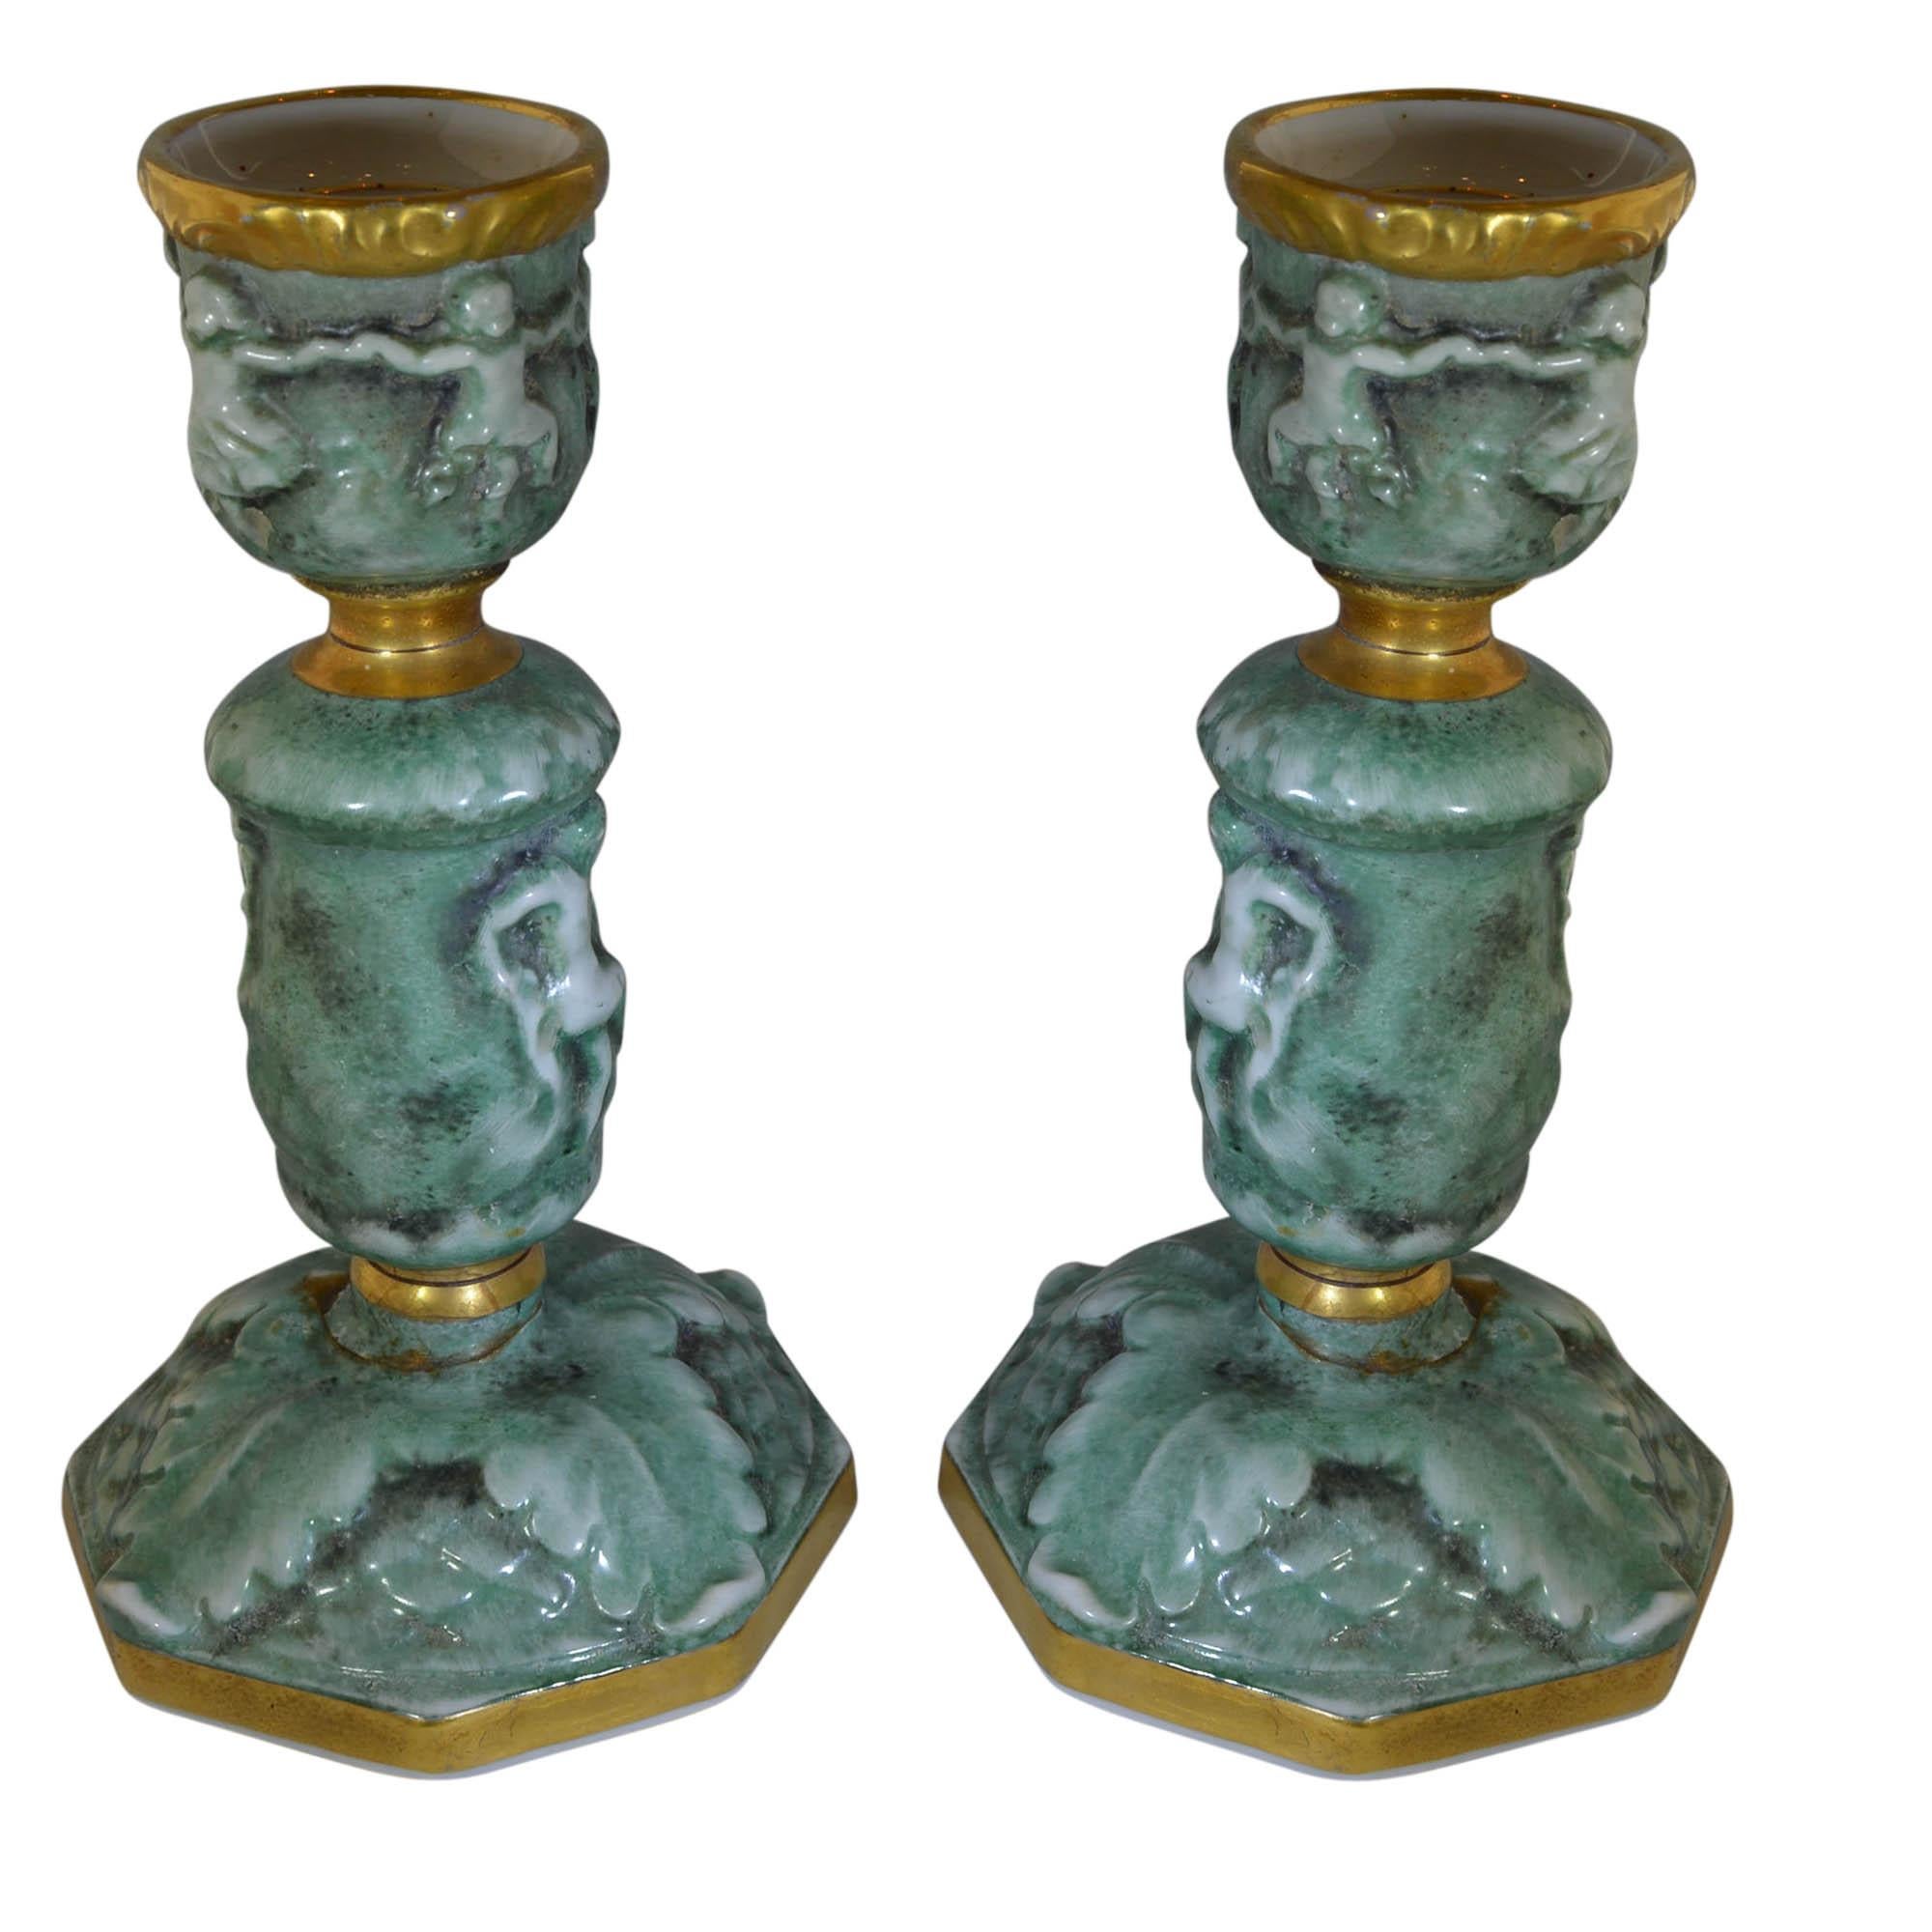 Vintage Von Schierholz candlesticks have putti dancing around the stems and feature a leaf pattern at the base. These heavily three dimensional detailed candlesticks are green with nearly white relief decoration. Gold gilt details. Makers mark.